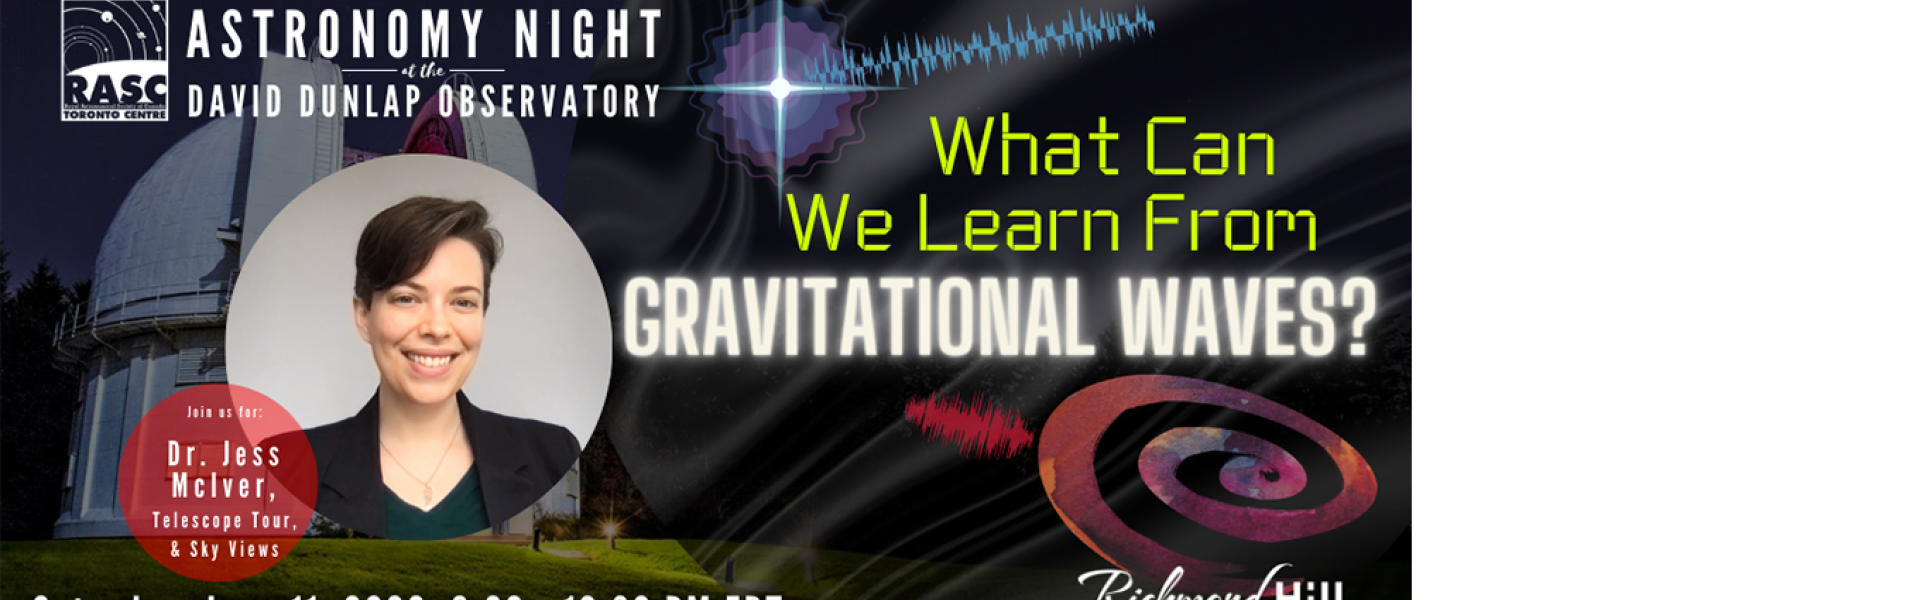 Astronomy Speaker's Night - What Can We Learn from Gravitational Waves?